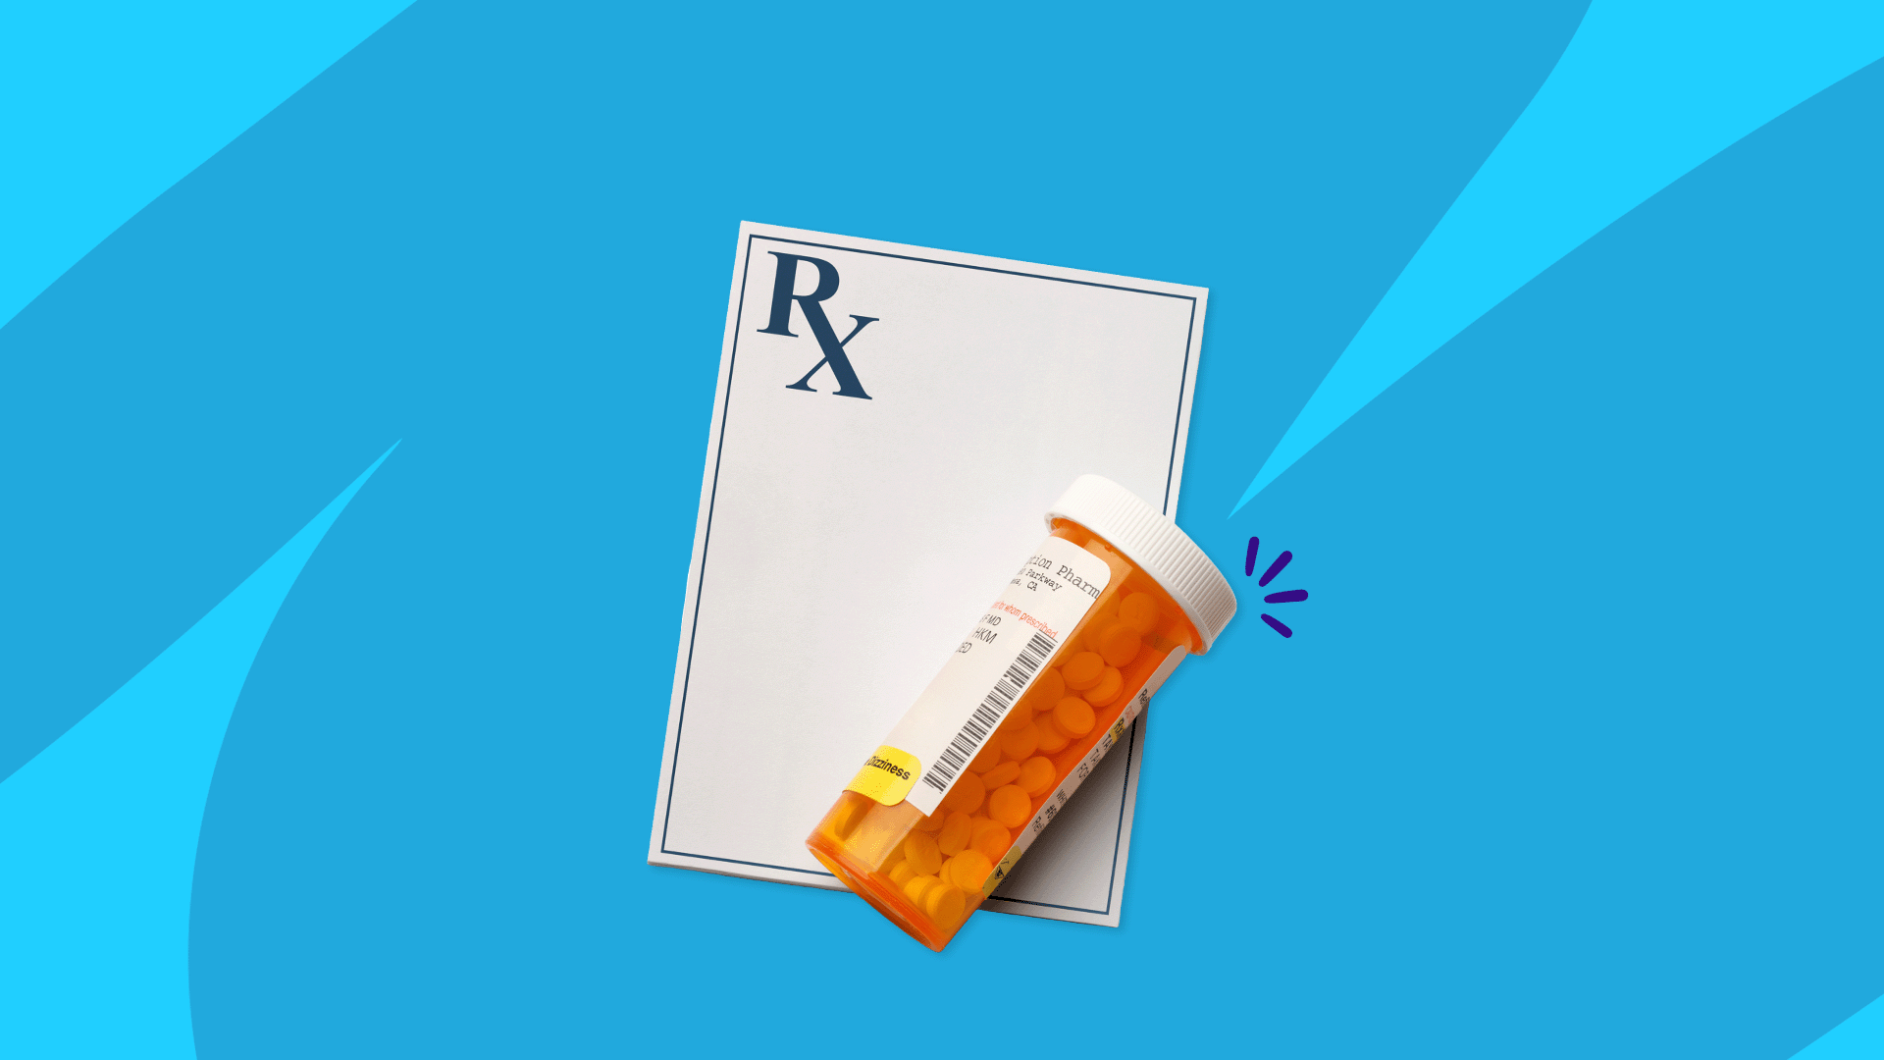 Rx pill bottle and prescription pad: Lorazepam for sleep